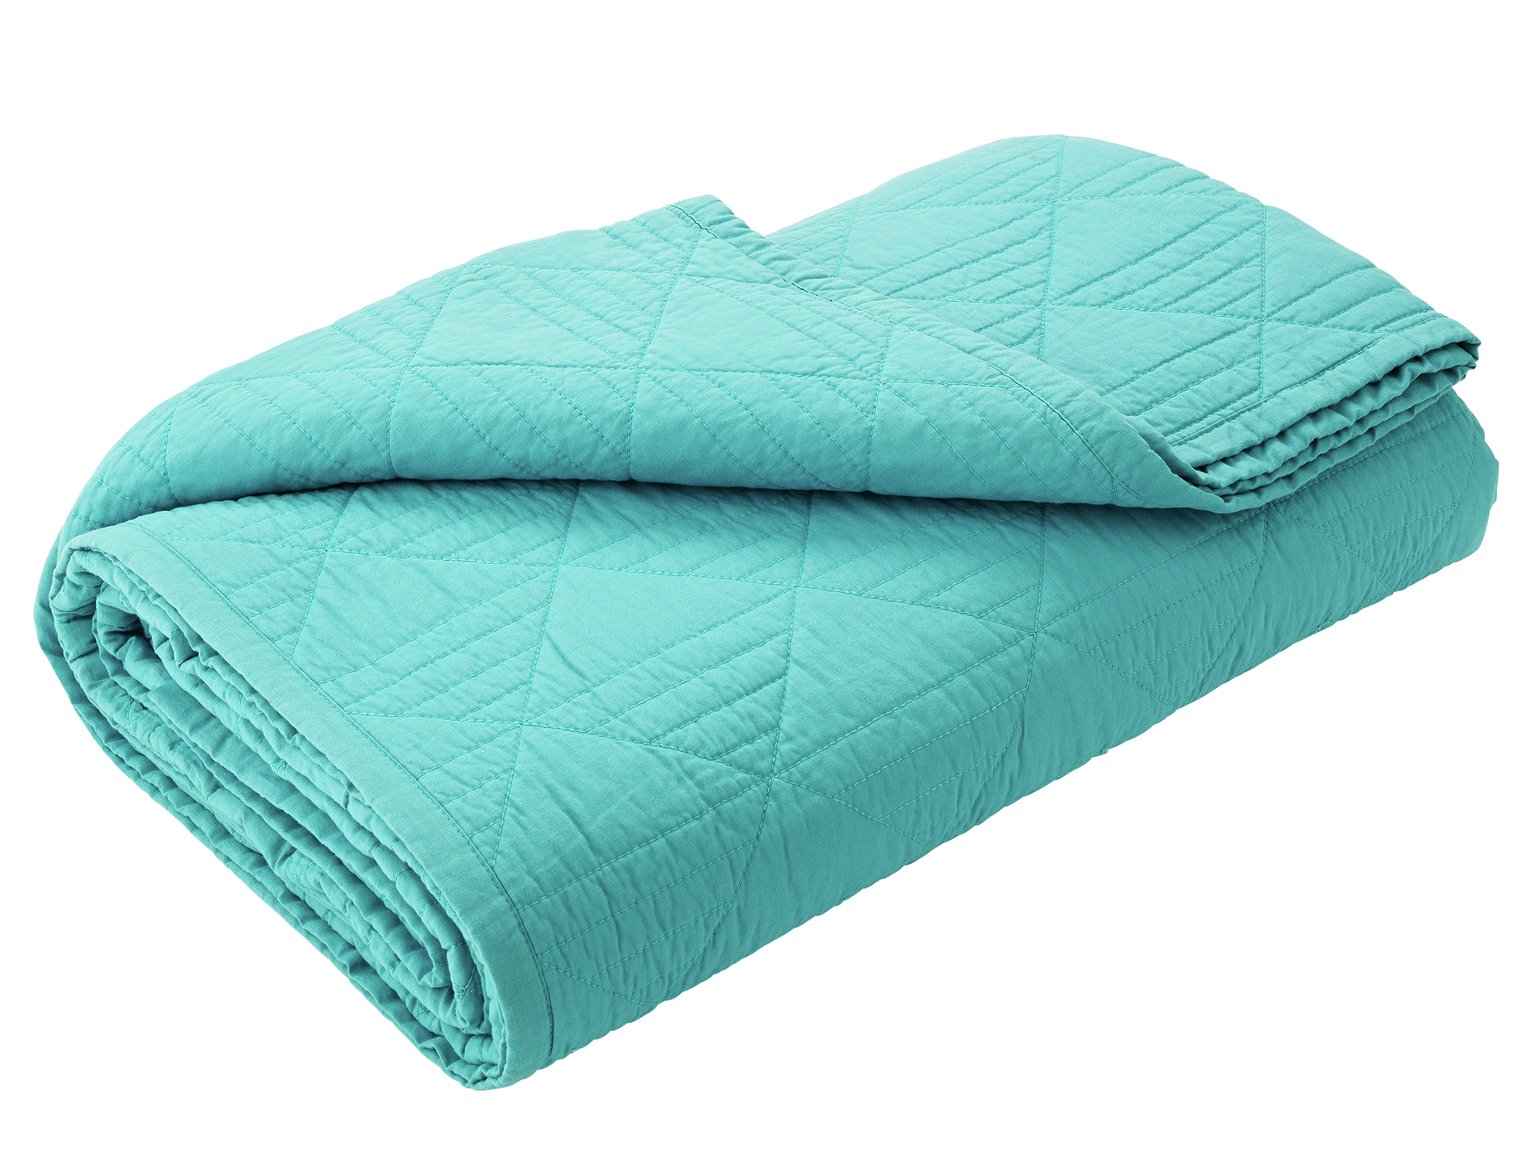 Sainsbury's Home Newstalgia Quilted Throw - Teal